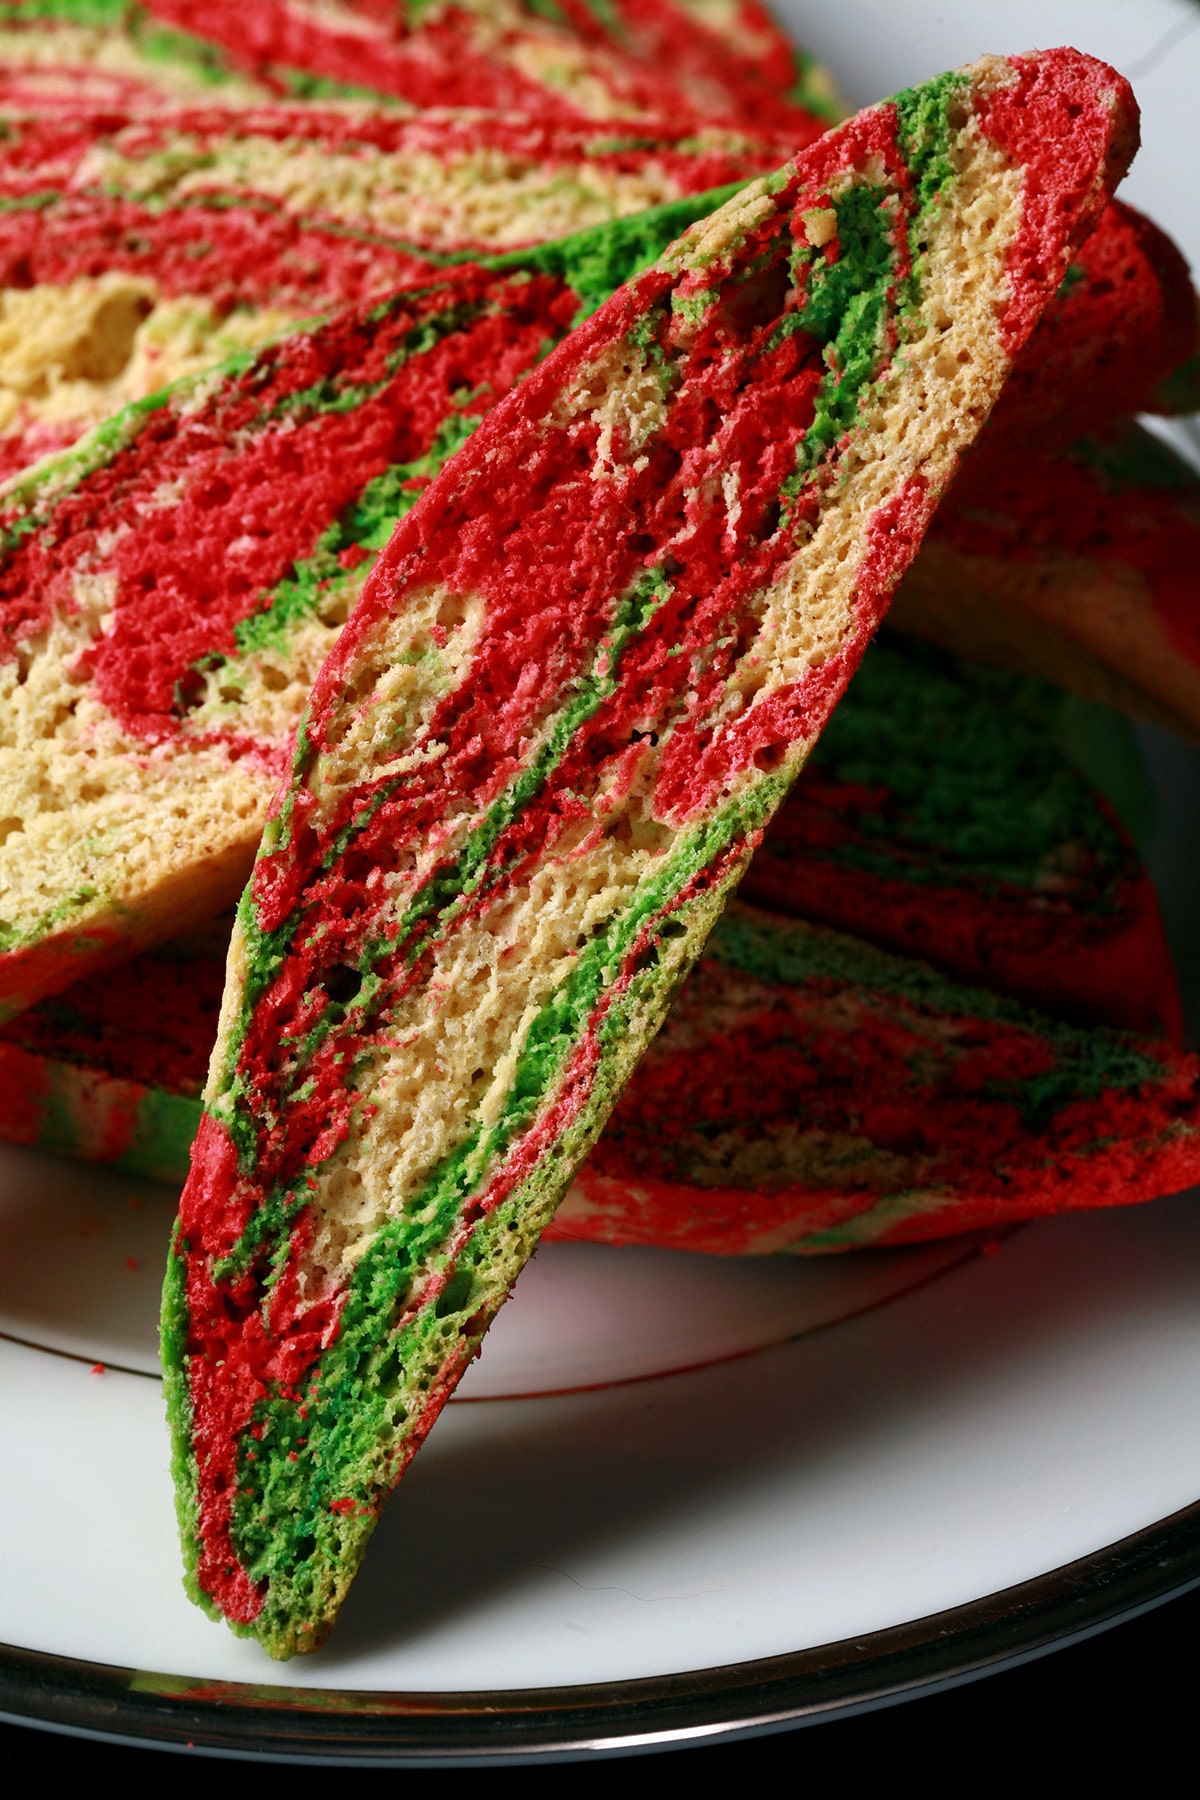 A plate with several pieces of green, red, and white marbled candy cane biscotti.